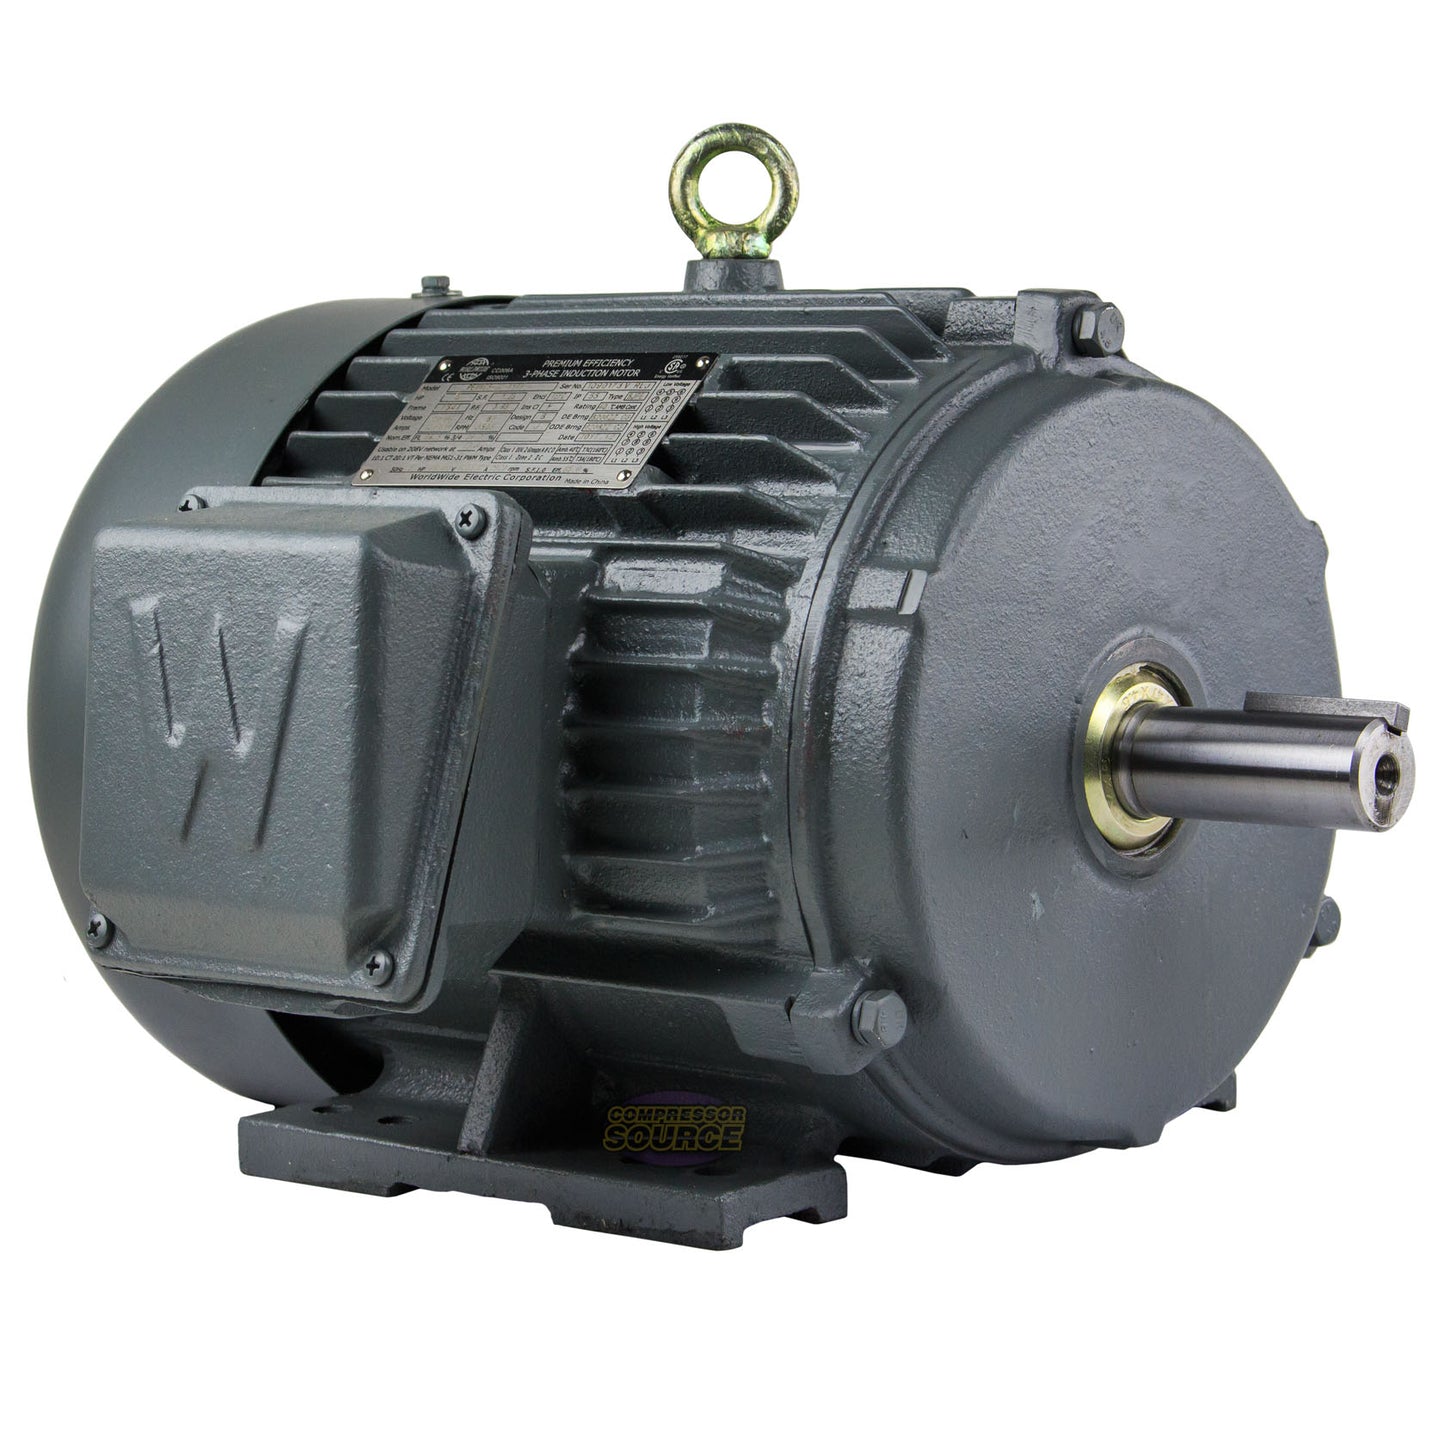 5 HP 3 Phase Electric Motor 3600  RPM 184T Frame TEFC 230/460 Volt Severe Duty